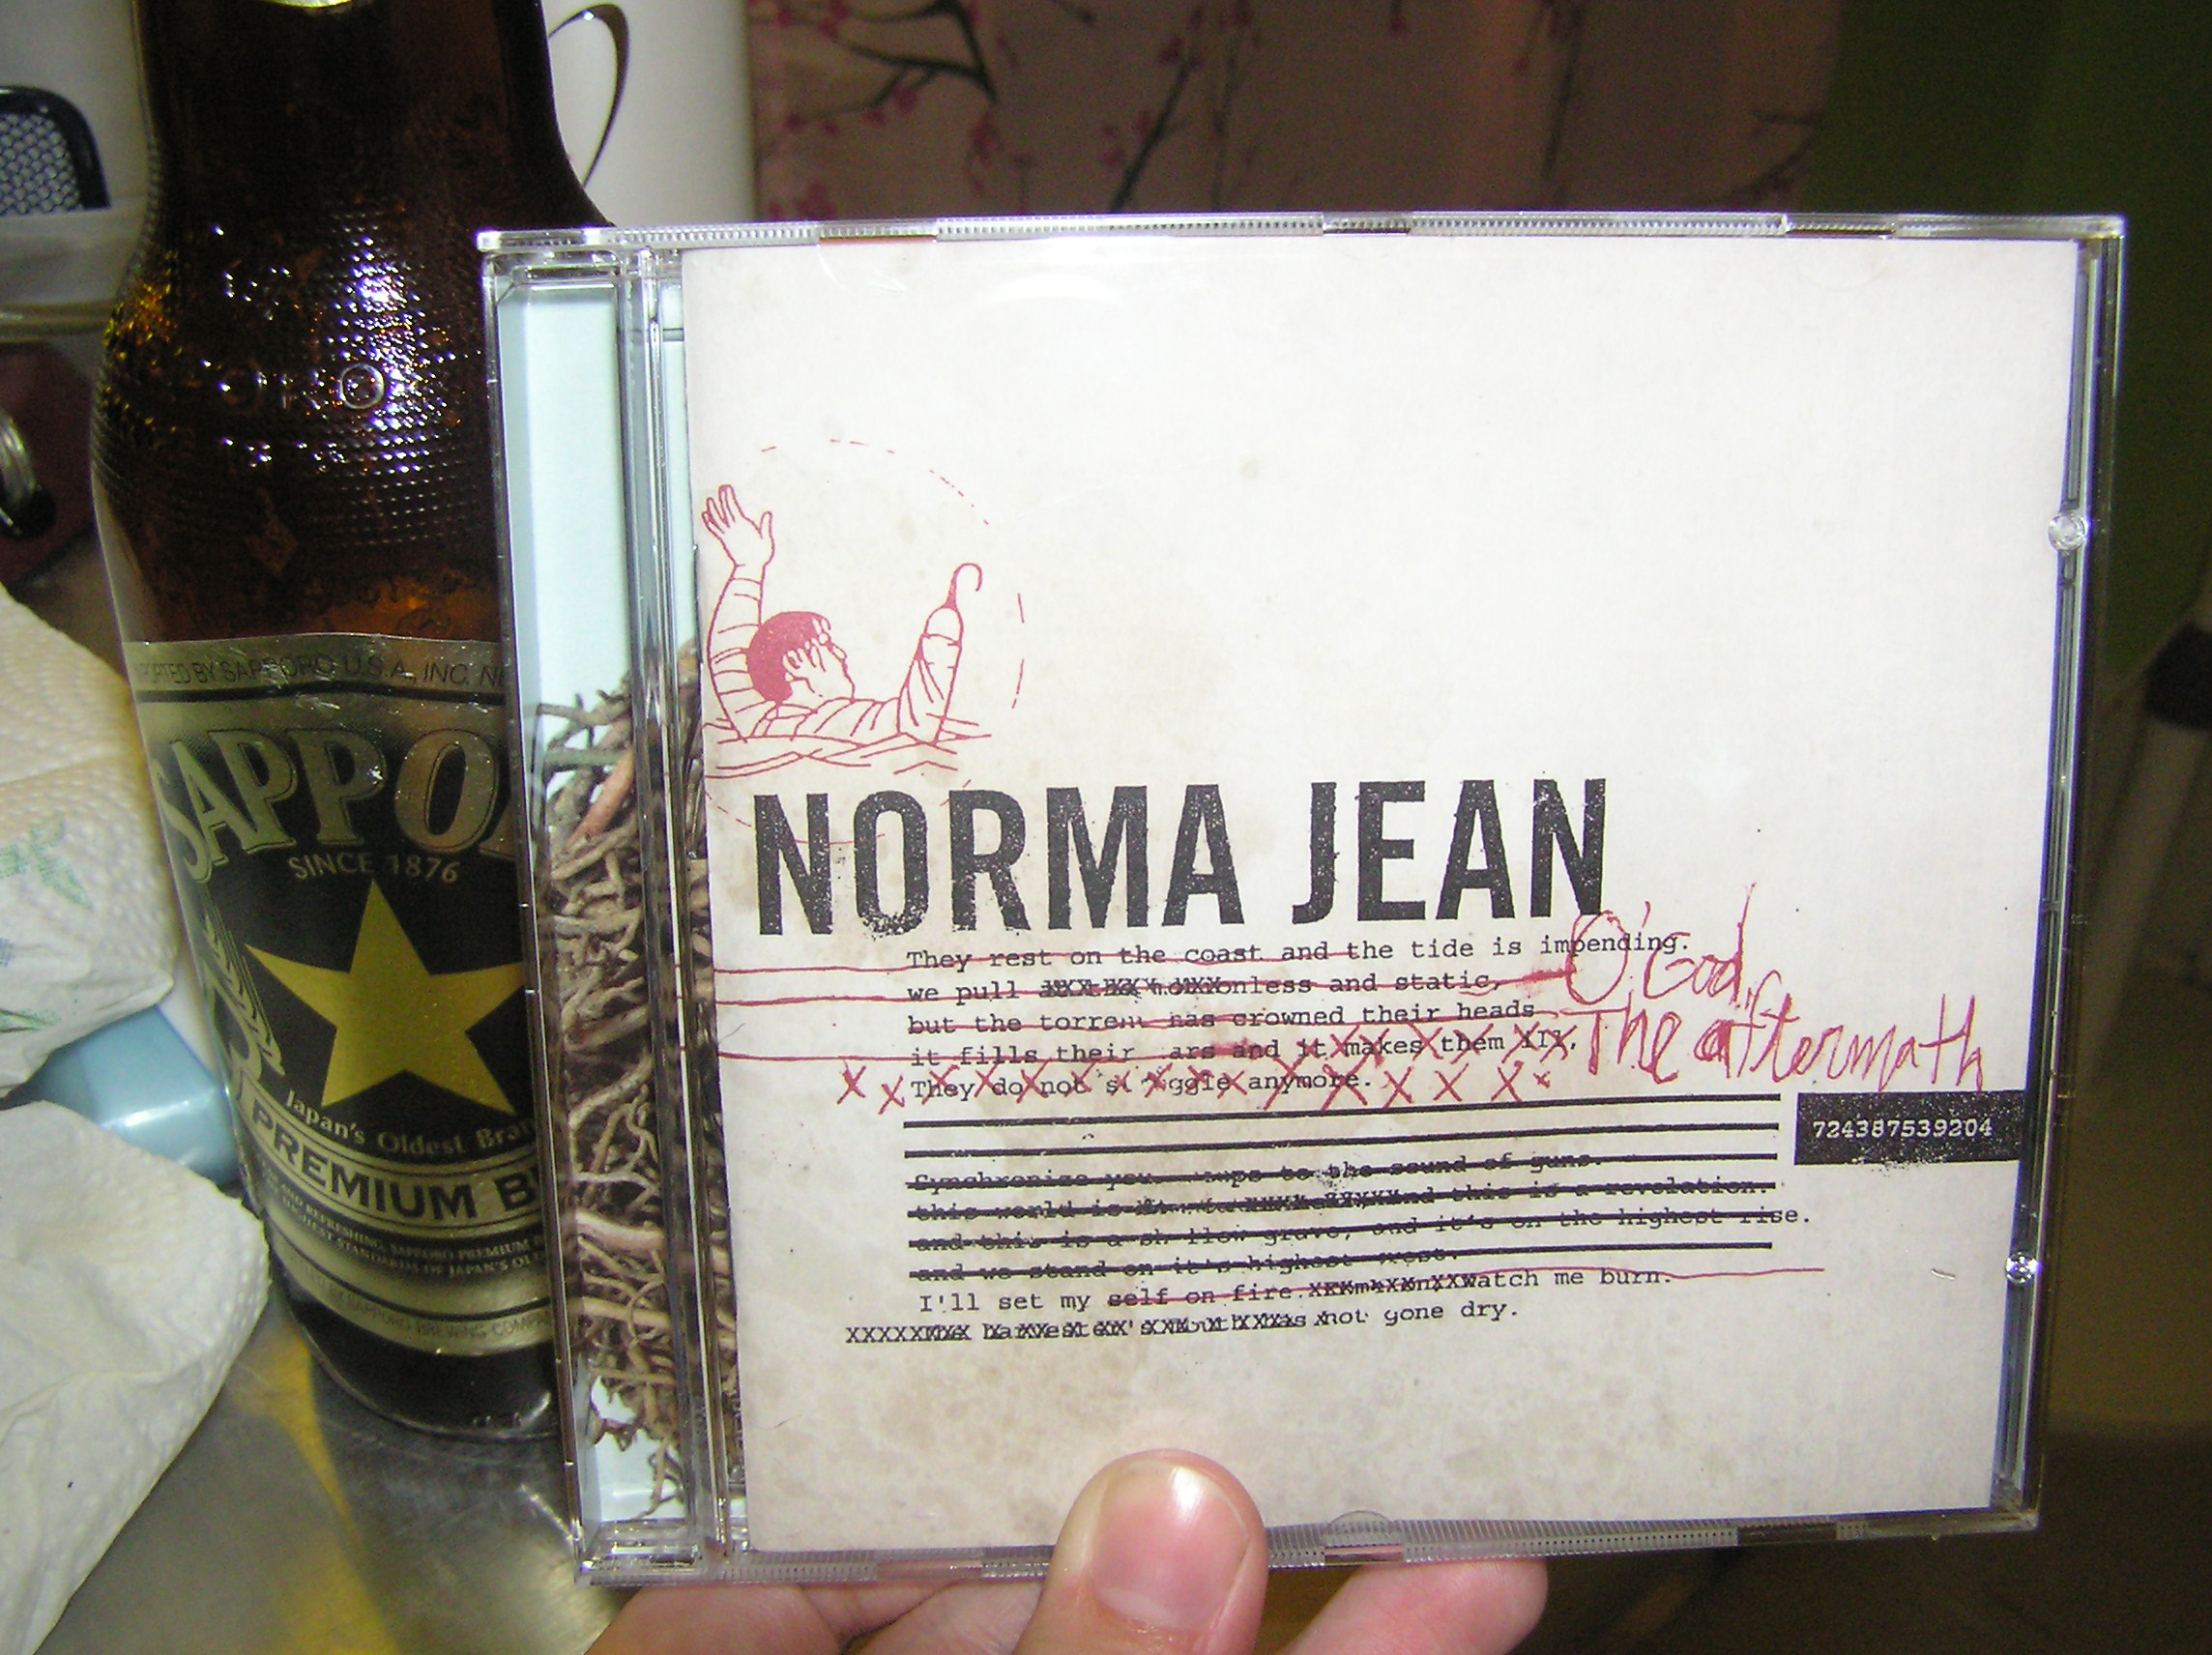 Norma_Jean-O_God_The_Aftermath-2005 - 00-norma_jean-o_god_the_aftermath-2005-cover-edg.jpg